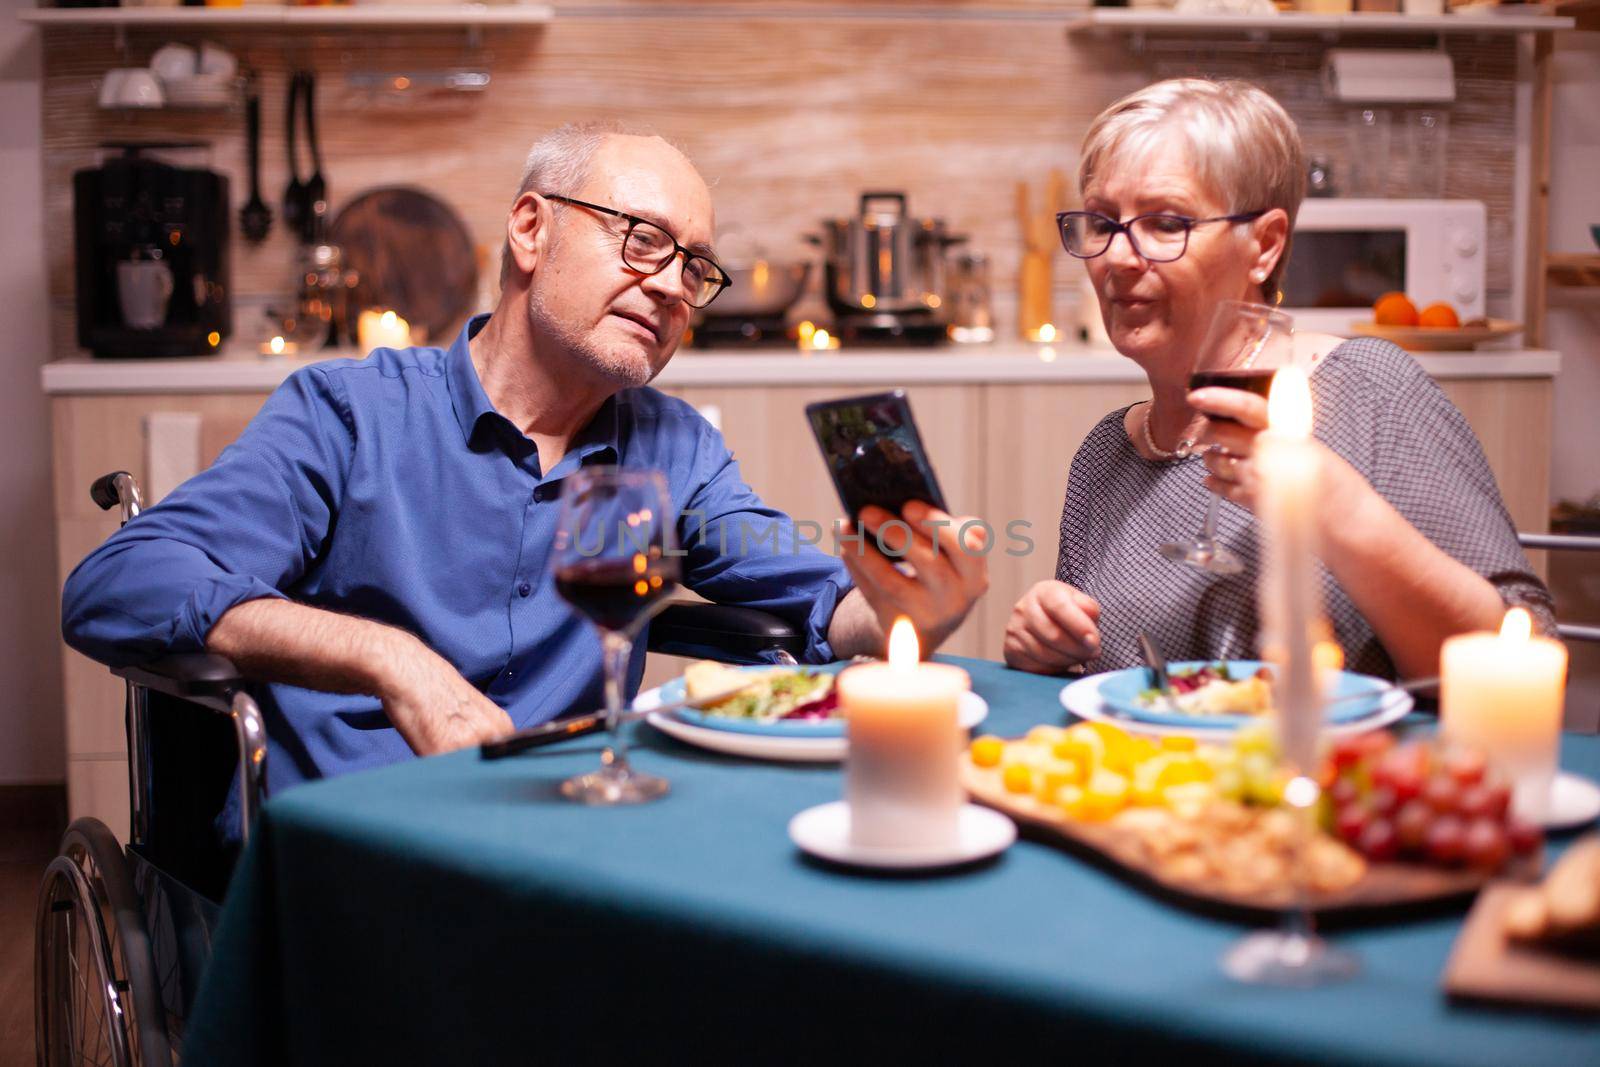 Man in wheelchair holding phone while having dinner with wife in kitchen. Scrolling and showing photos. Imobilized handicapped senior husband scolling on phone enjoying the festive meal.